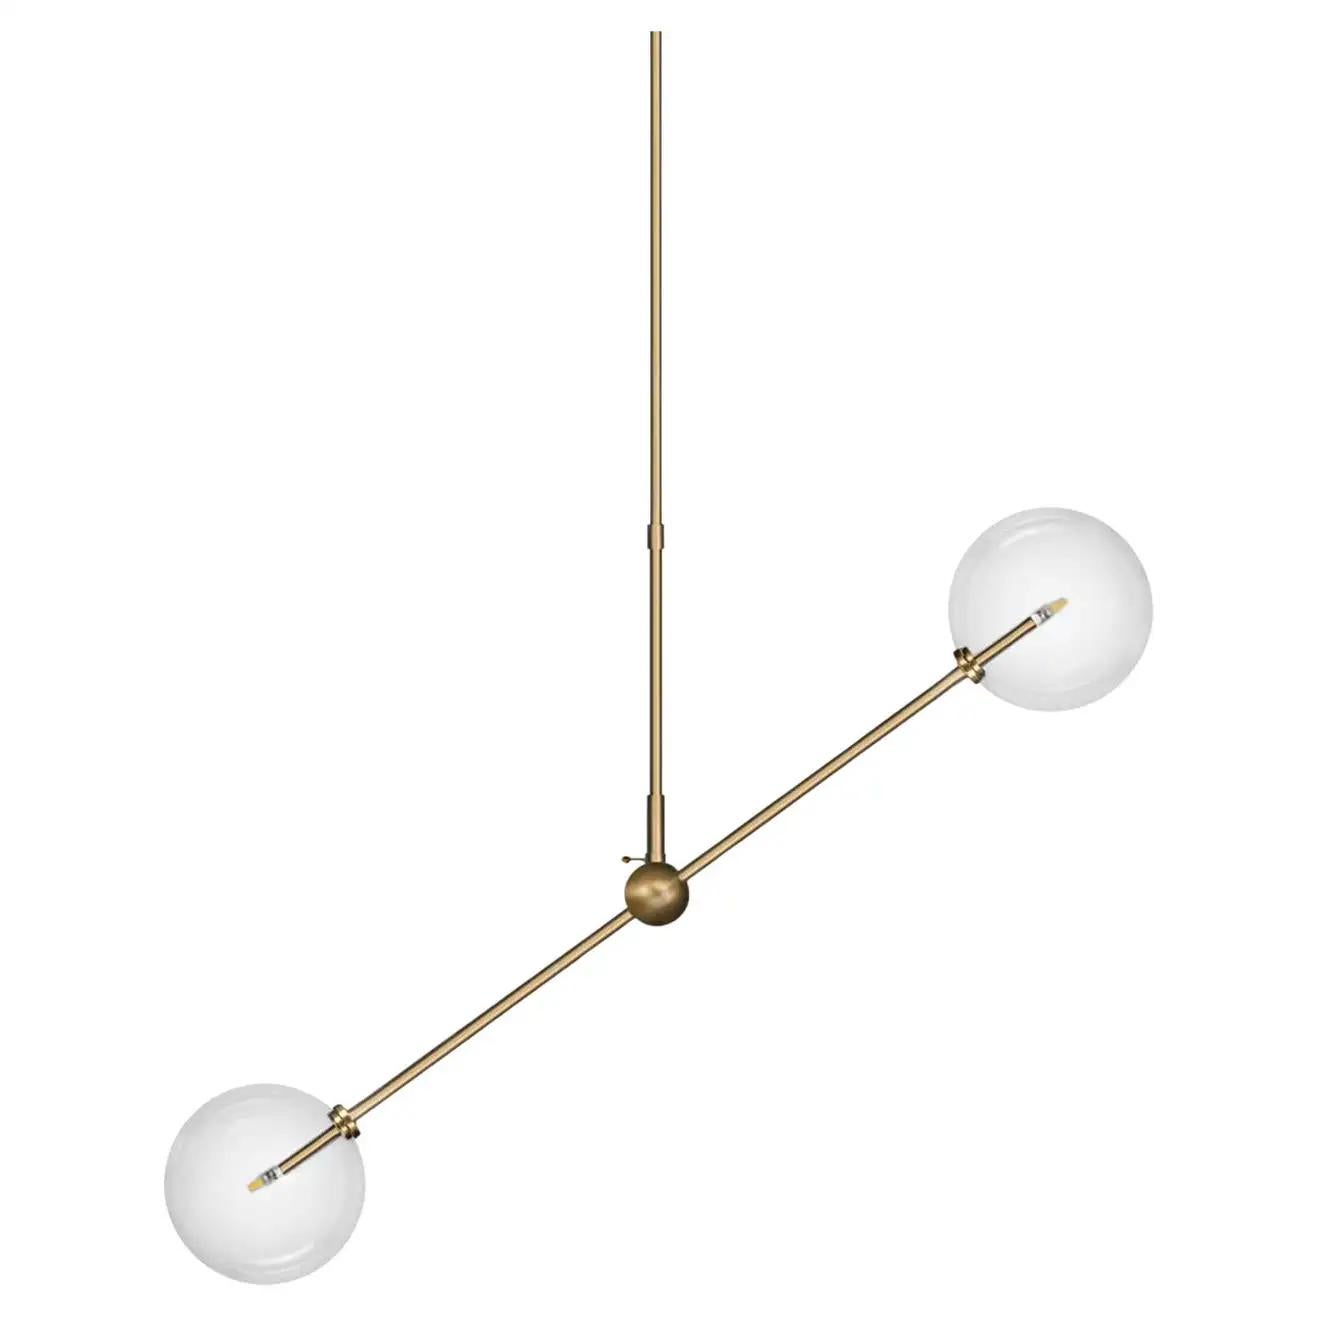 Brass 150 x 150 contemporary chandelier by Schwung.
Dimensions: D 15 x W 90.4 x H 163.3 cm.
Materials: solid brass, hand-blown glass globes.
Finish: natural brass. 
Available in finishes: black gunmetal or polished nickel. Also available in